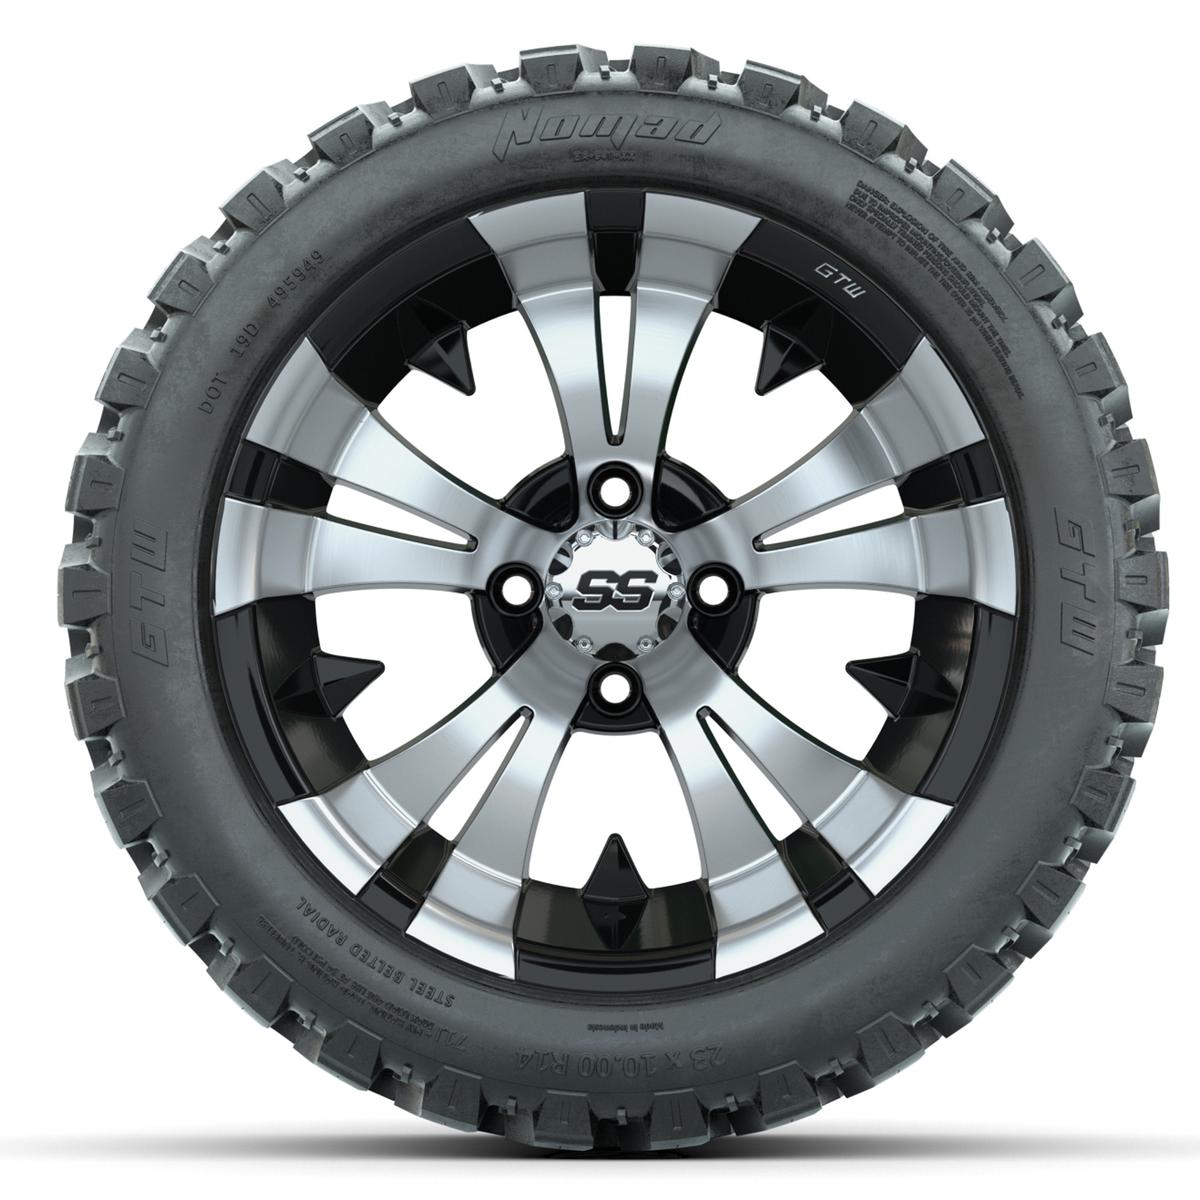 Set of (4) 14 in GTW Vampire Wheels with 23x10-14 GTW Nomad All-Terrain Tires